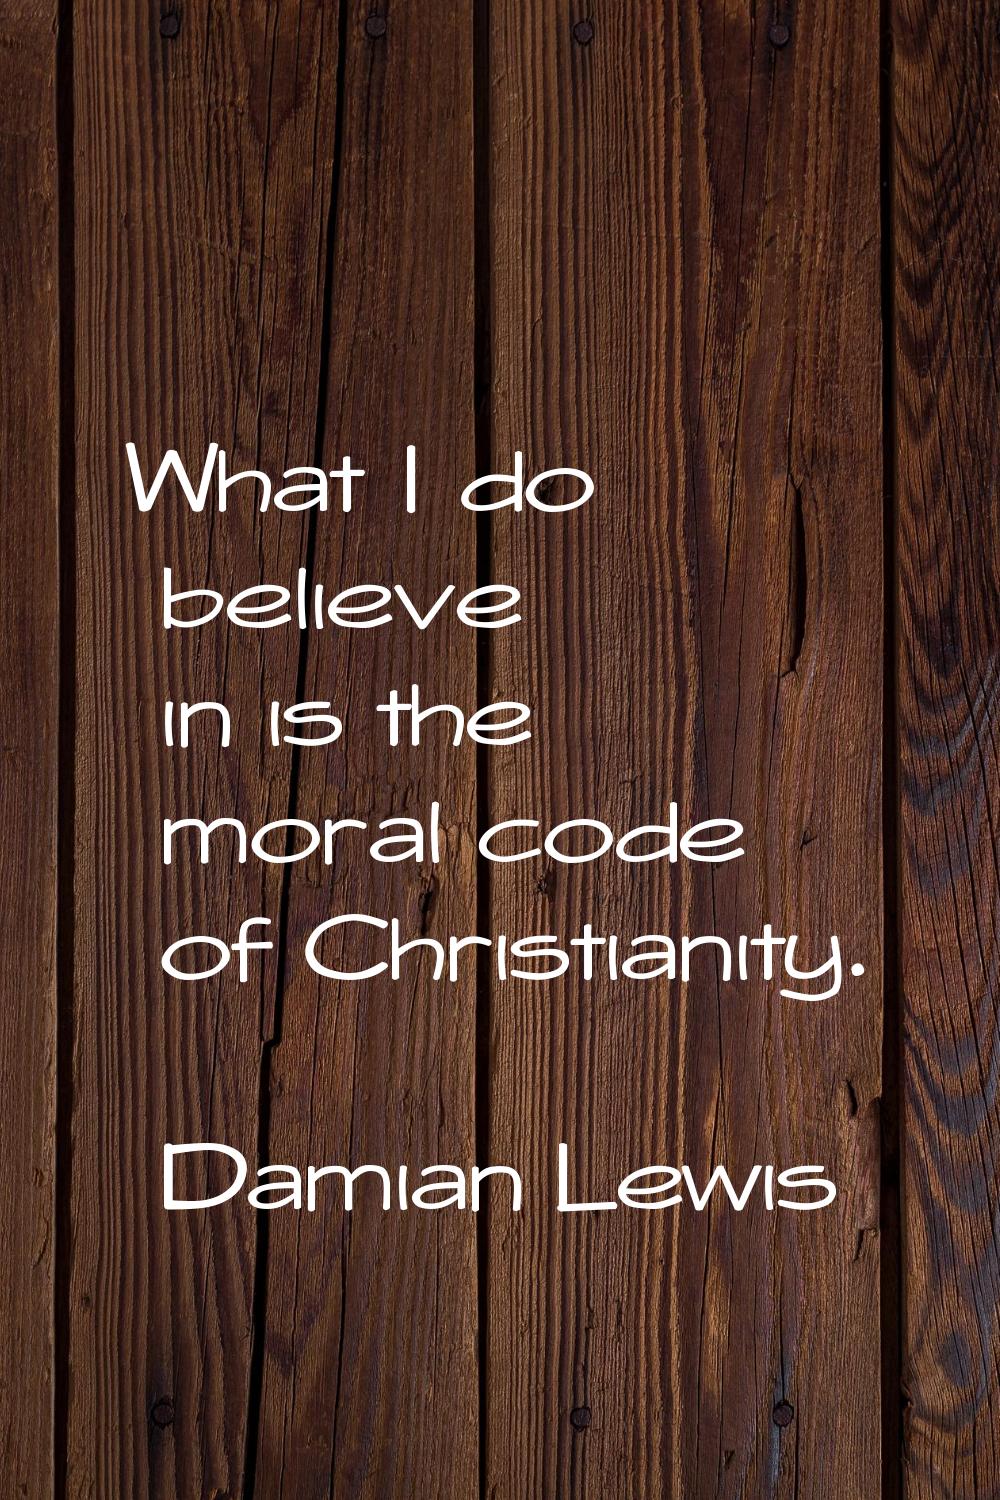 What I do believe in is the moral code of Christianity.